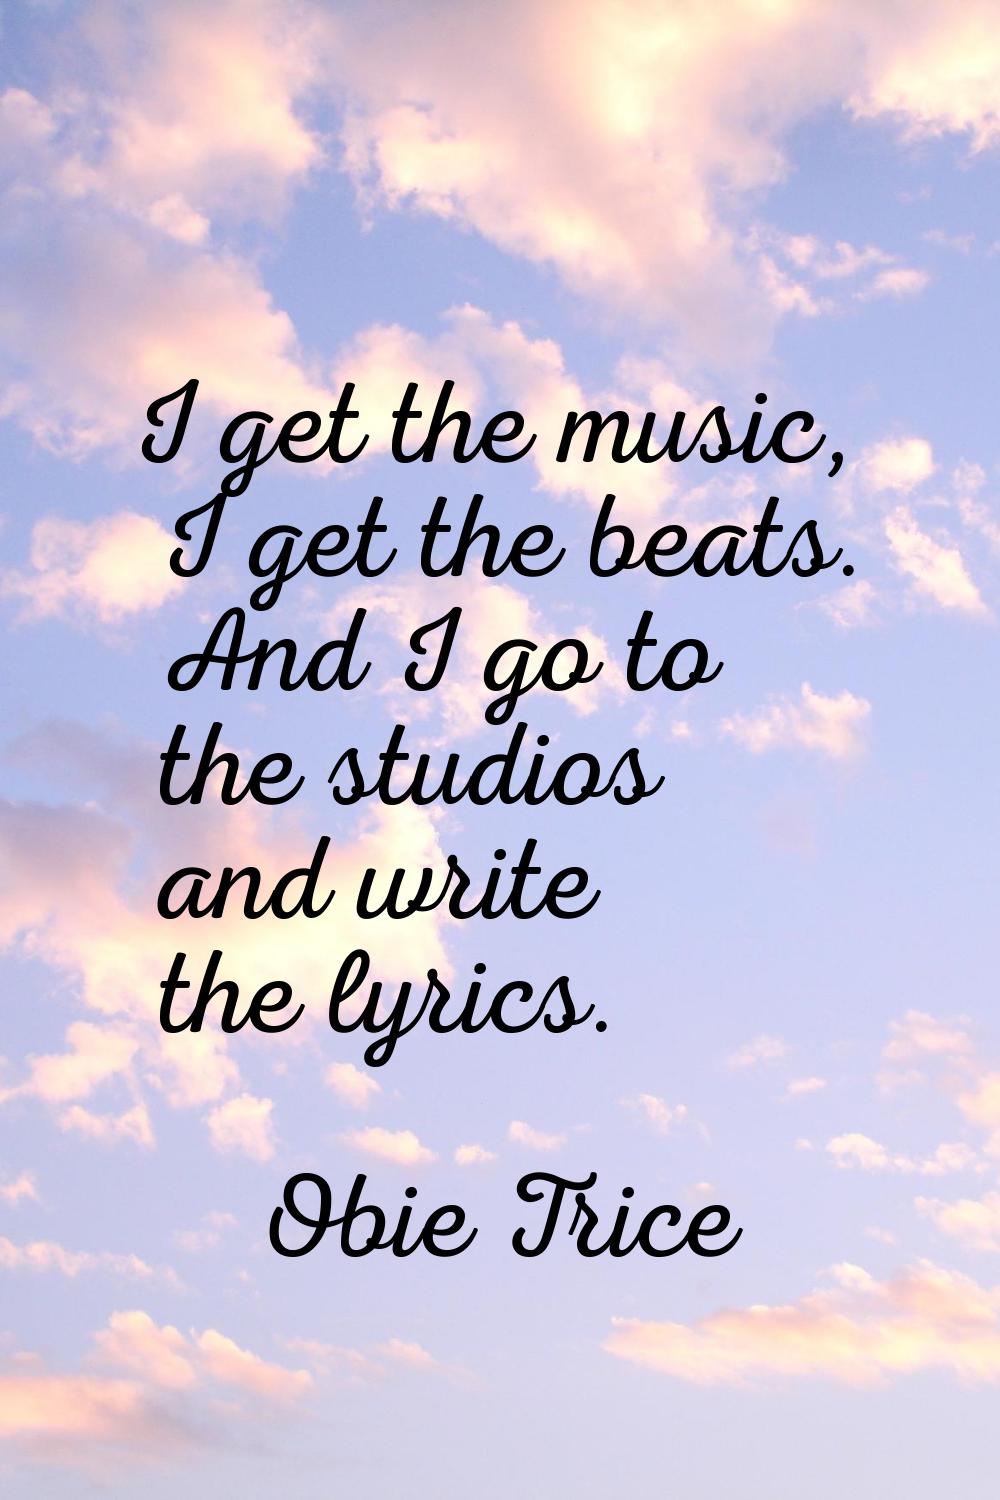 I get the music, I get the beats. And I go to the studios and write the lyrics.